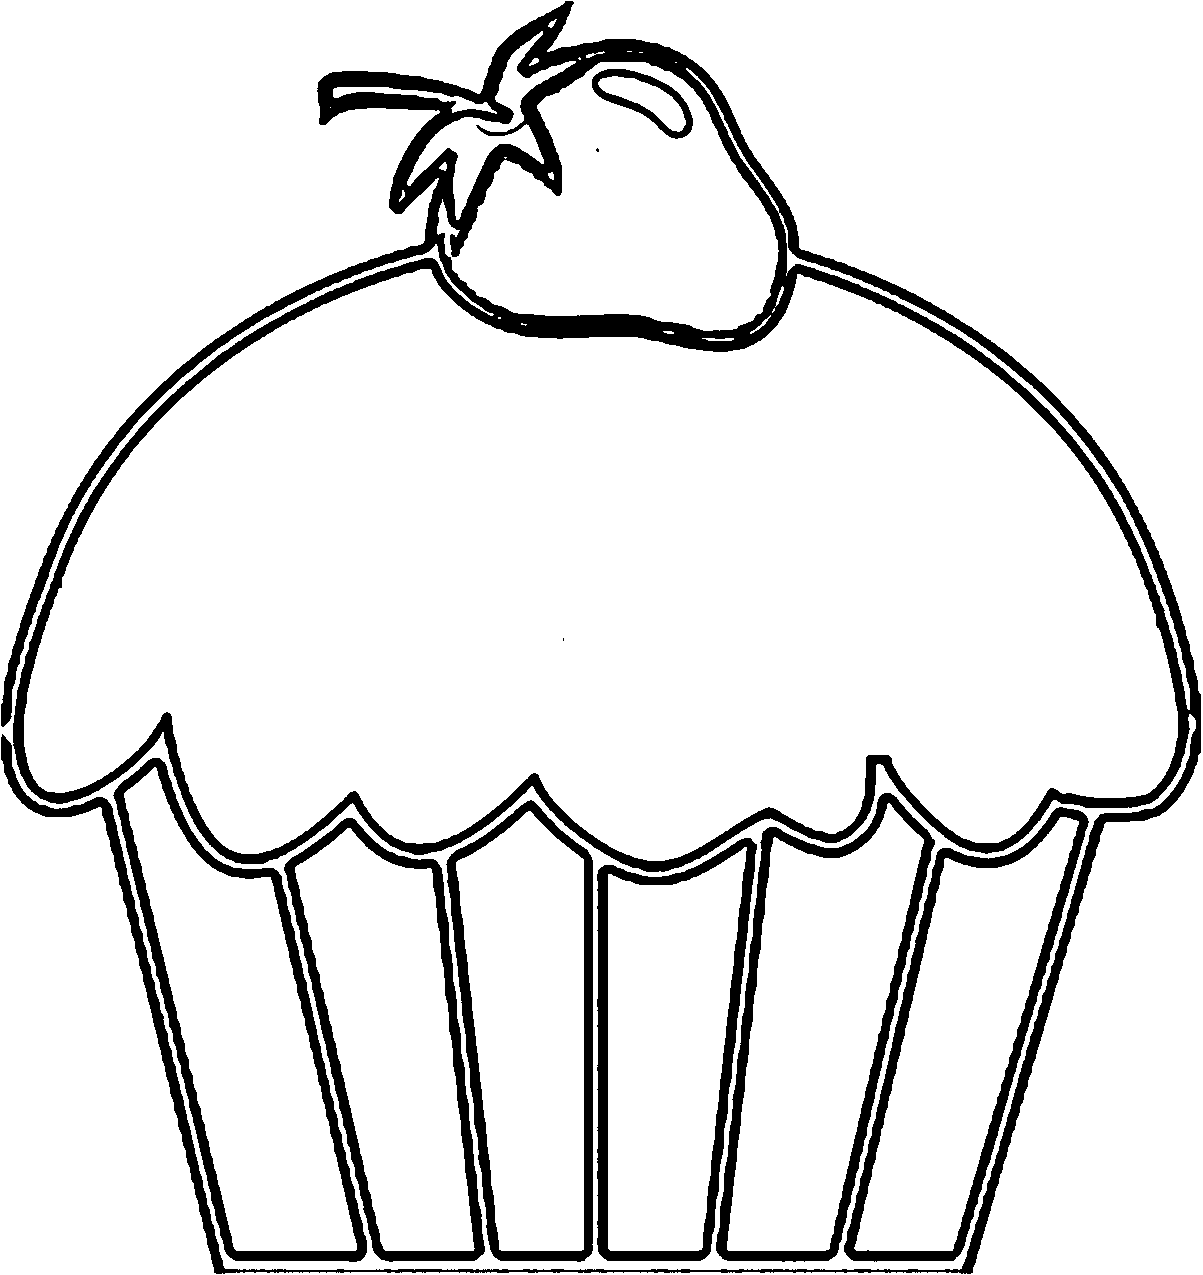 Cake Pop Coloring Pages Coloring Pages